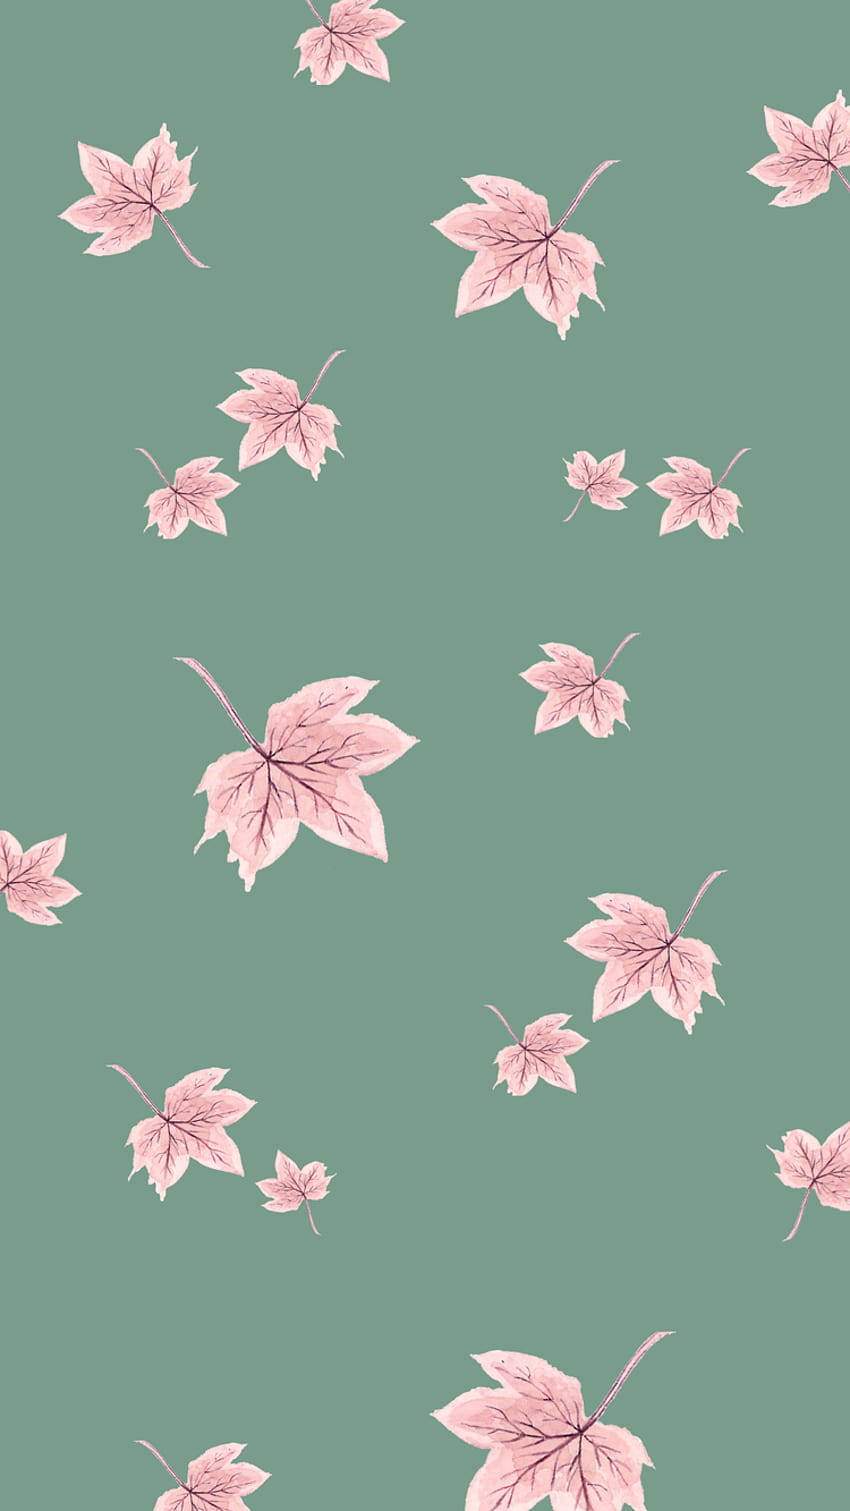 Pink Leaves On A Green Background Wallpaper